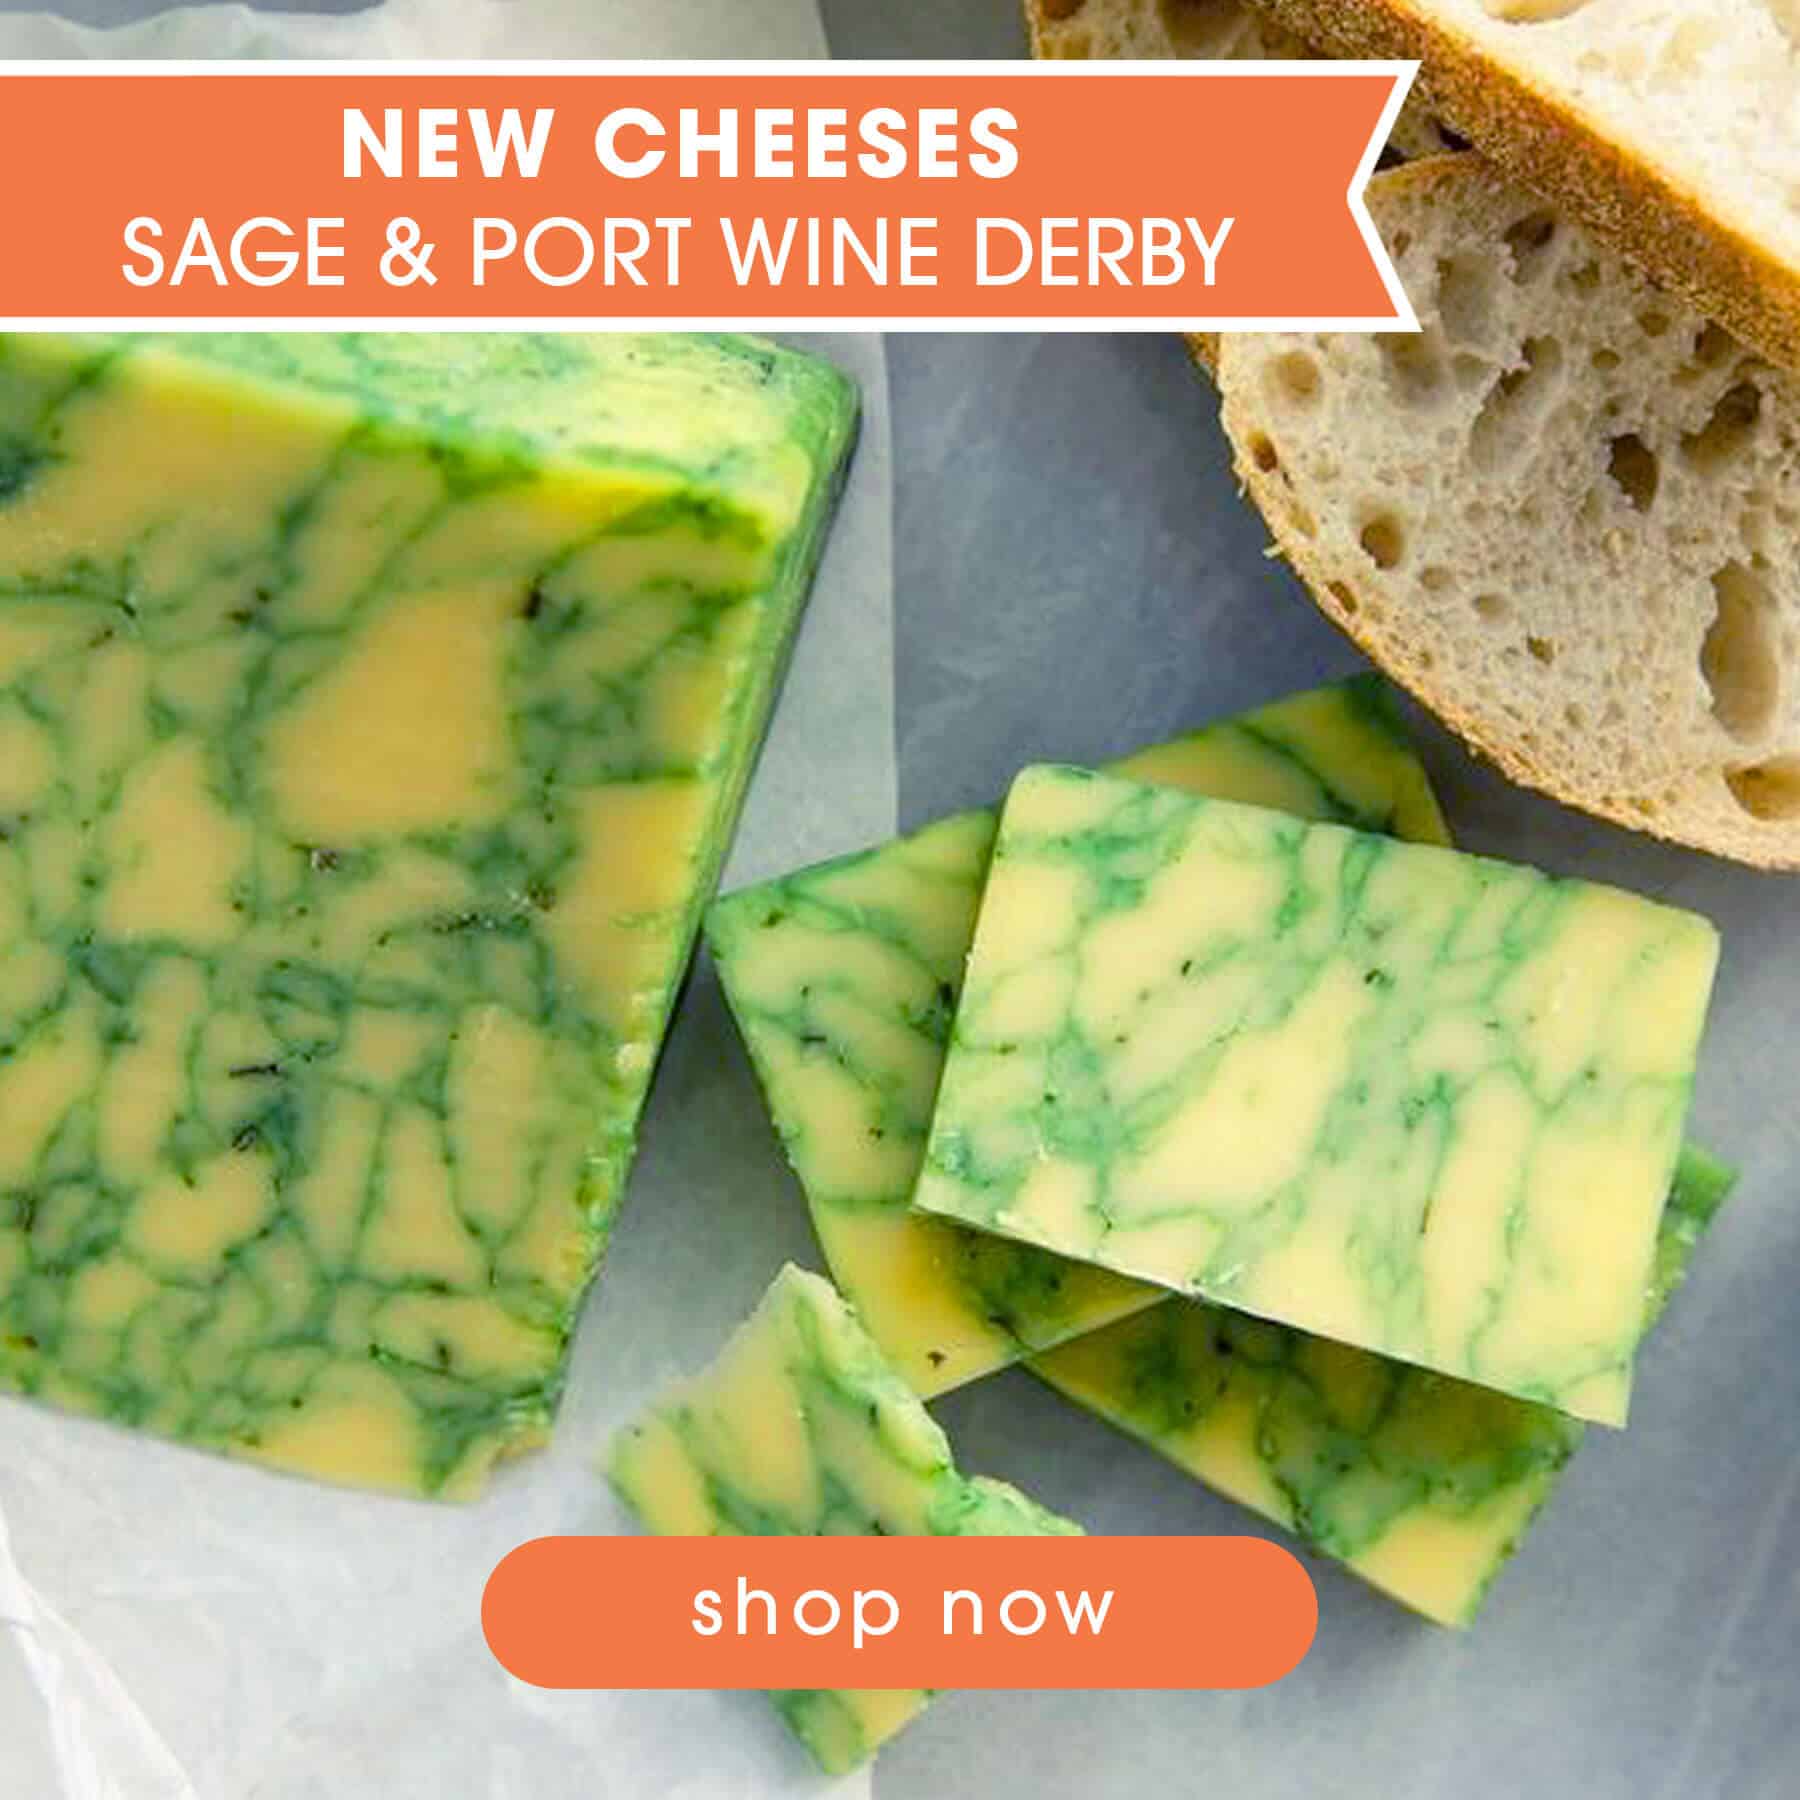 New! Sage Derby and Port Wine Derby Cheeses in the Market - Available by the Pound | Food Related | San Antonio TX